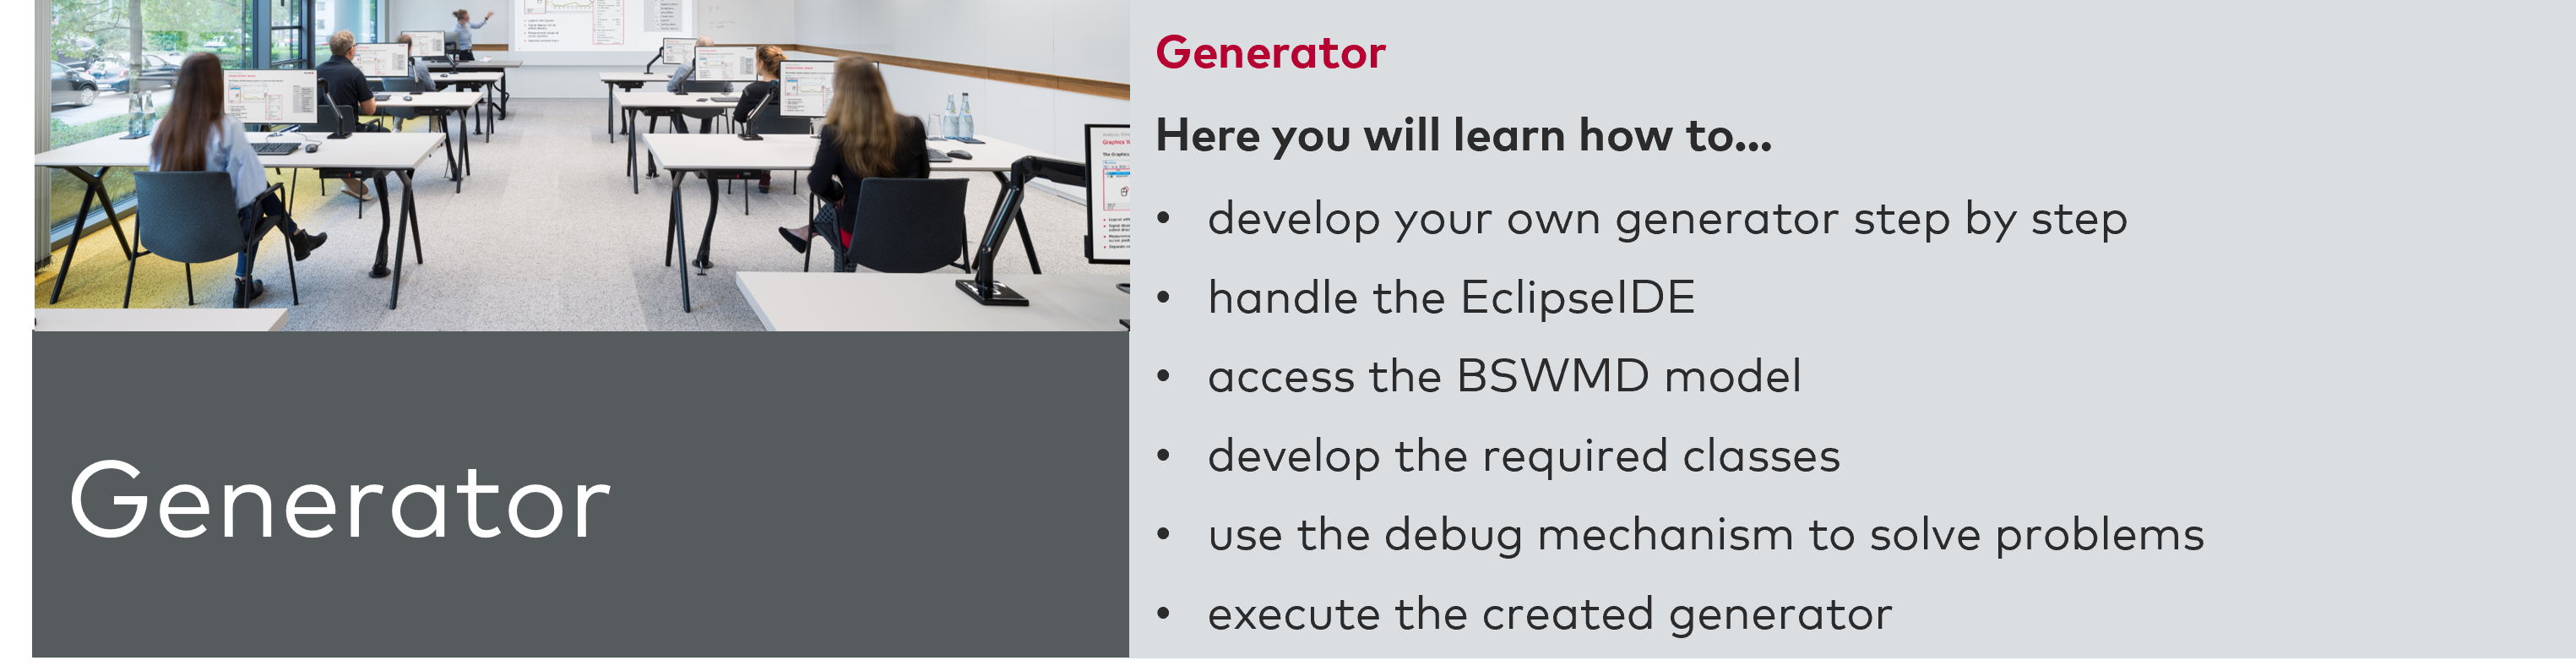 Learning goals and button to open module 2: Generator